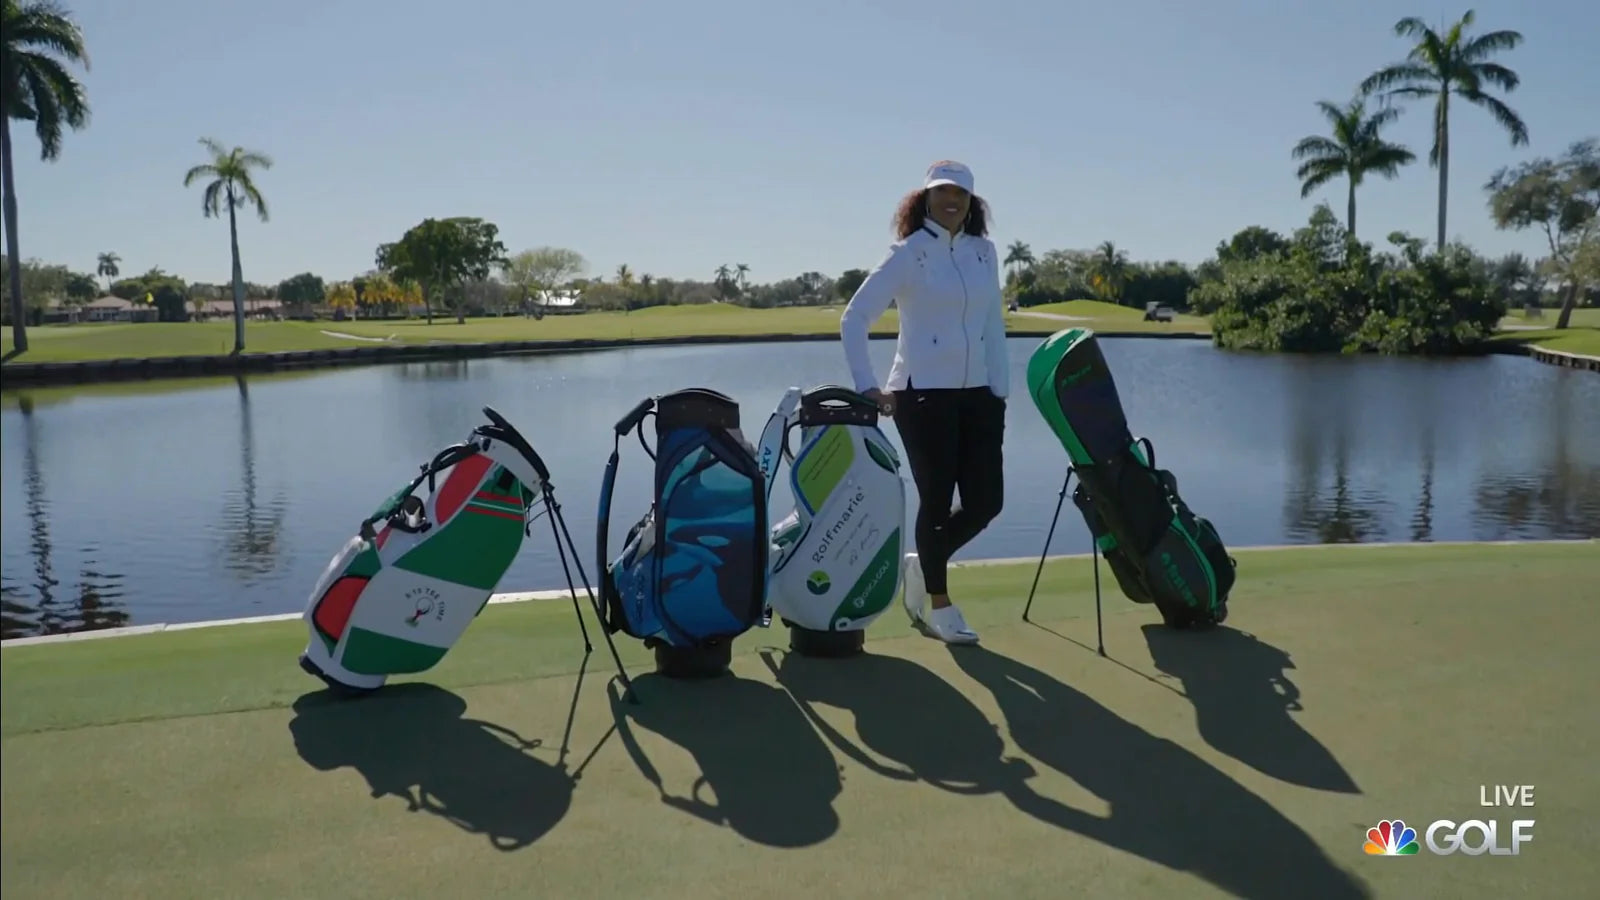 Golf Channel features ORCA Golf